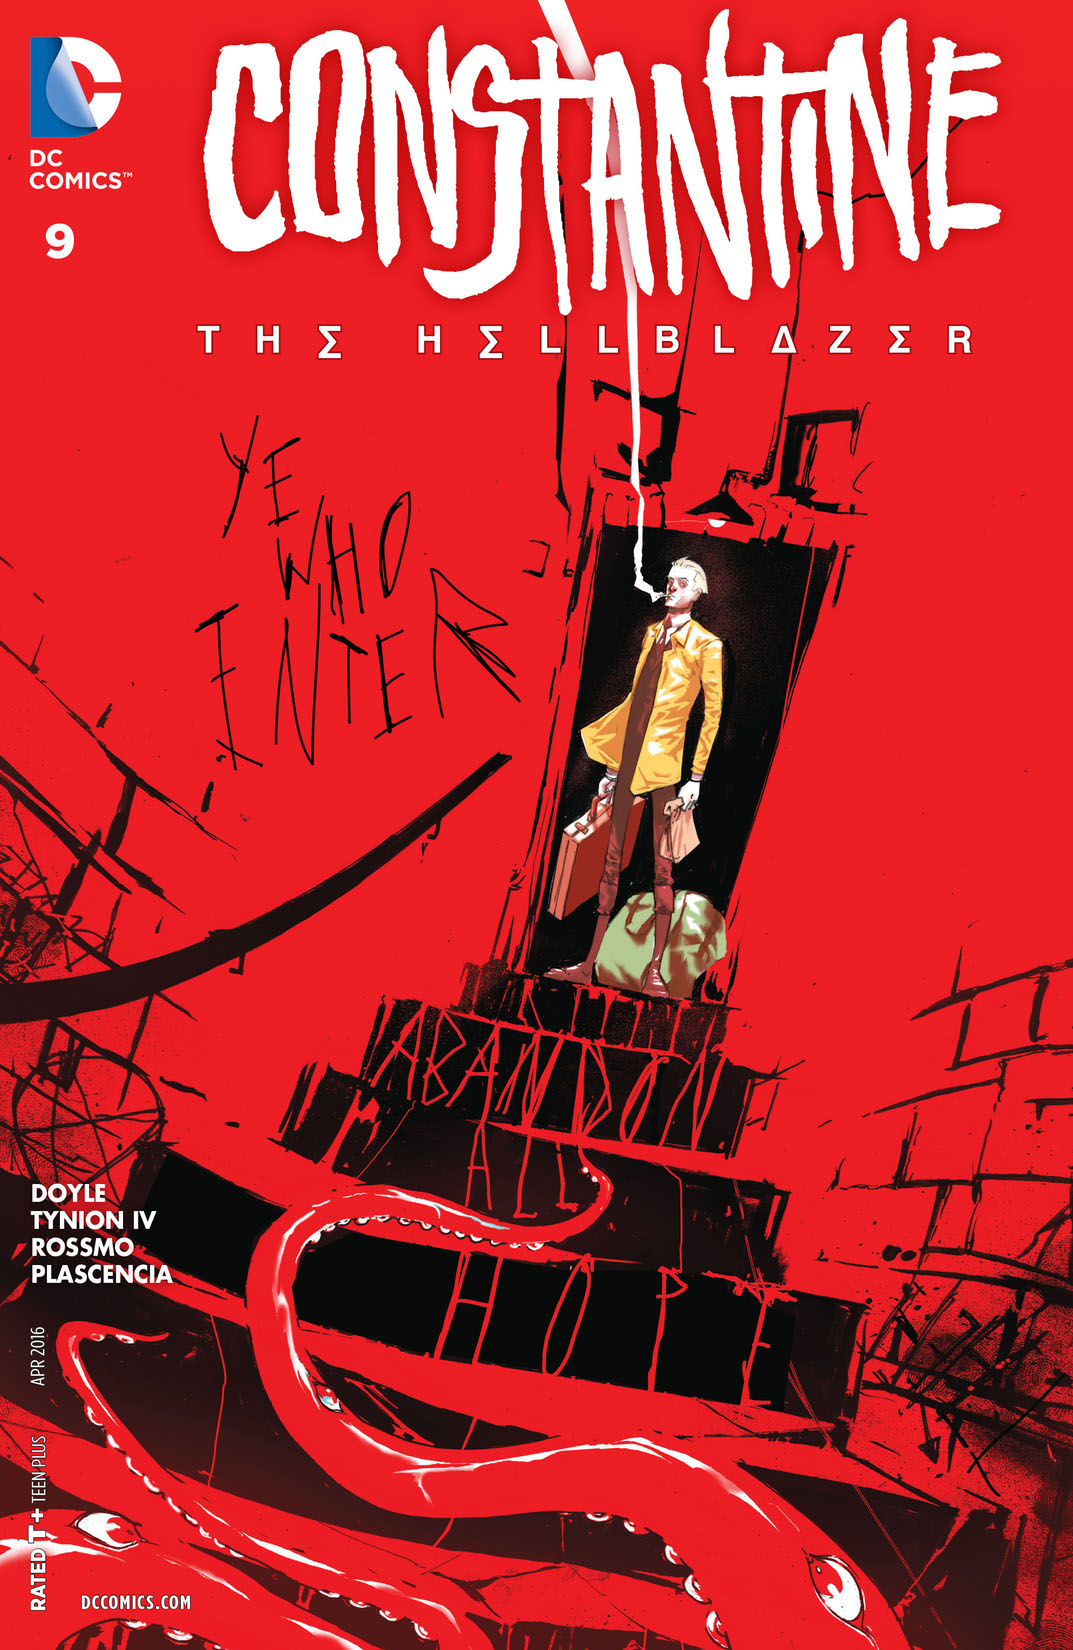 Constantine: The Hellblazer #9 preview images